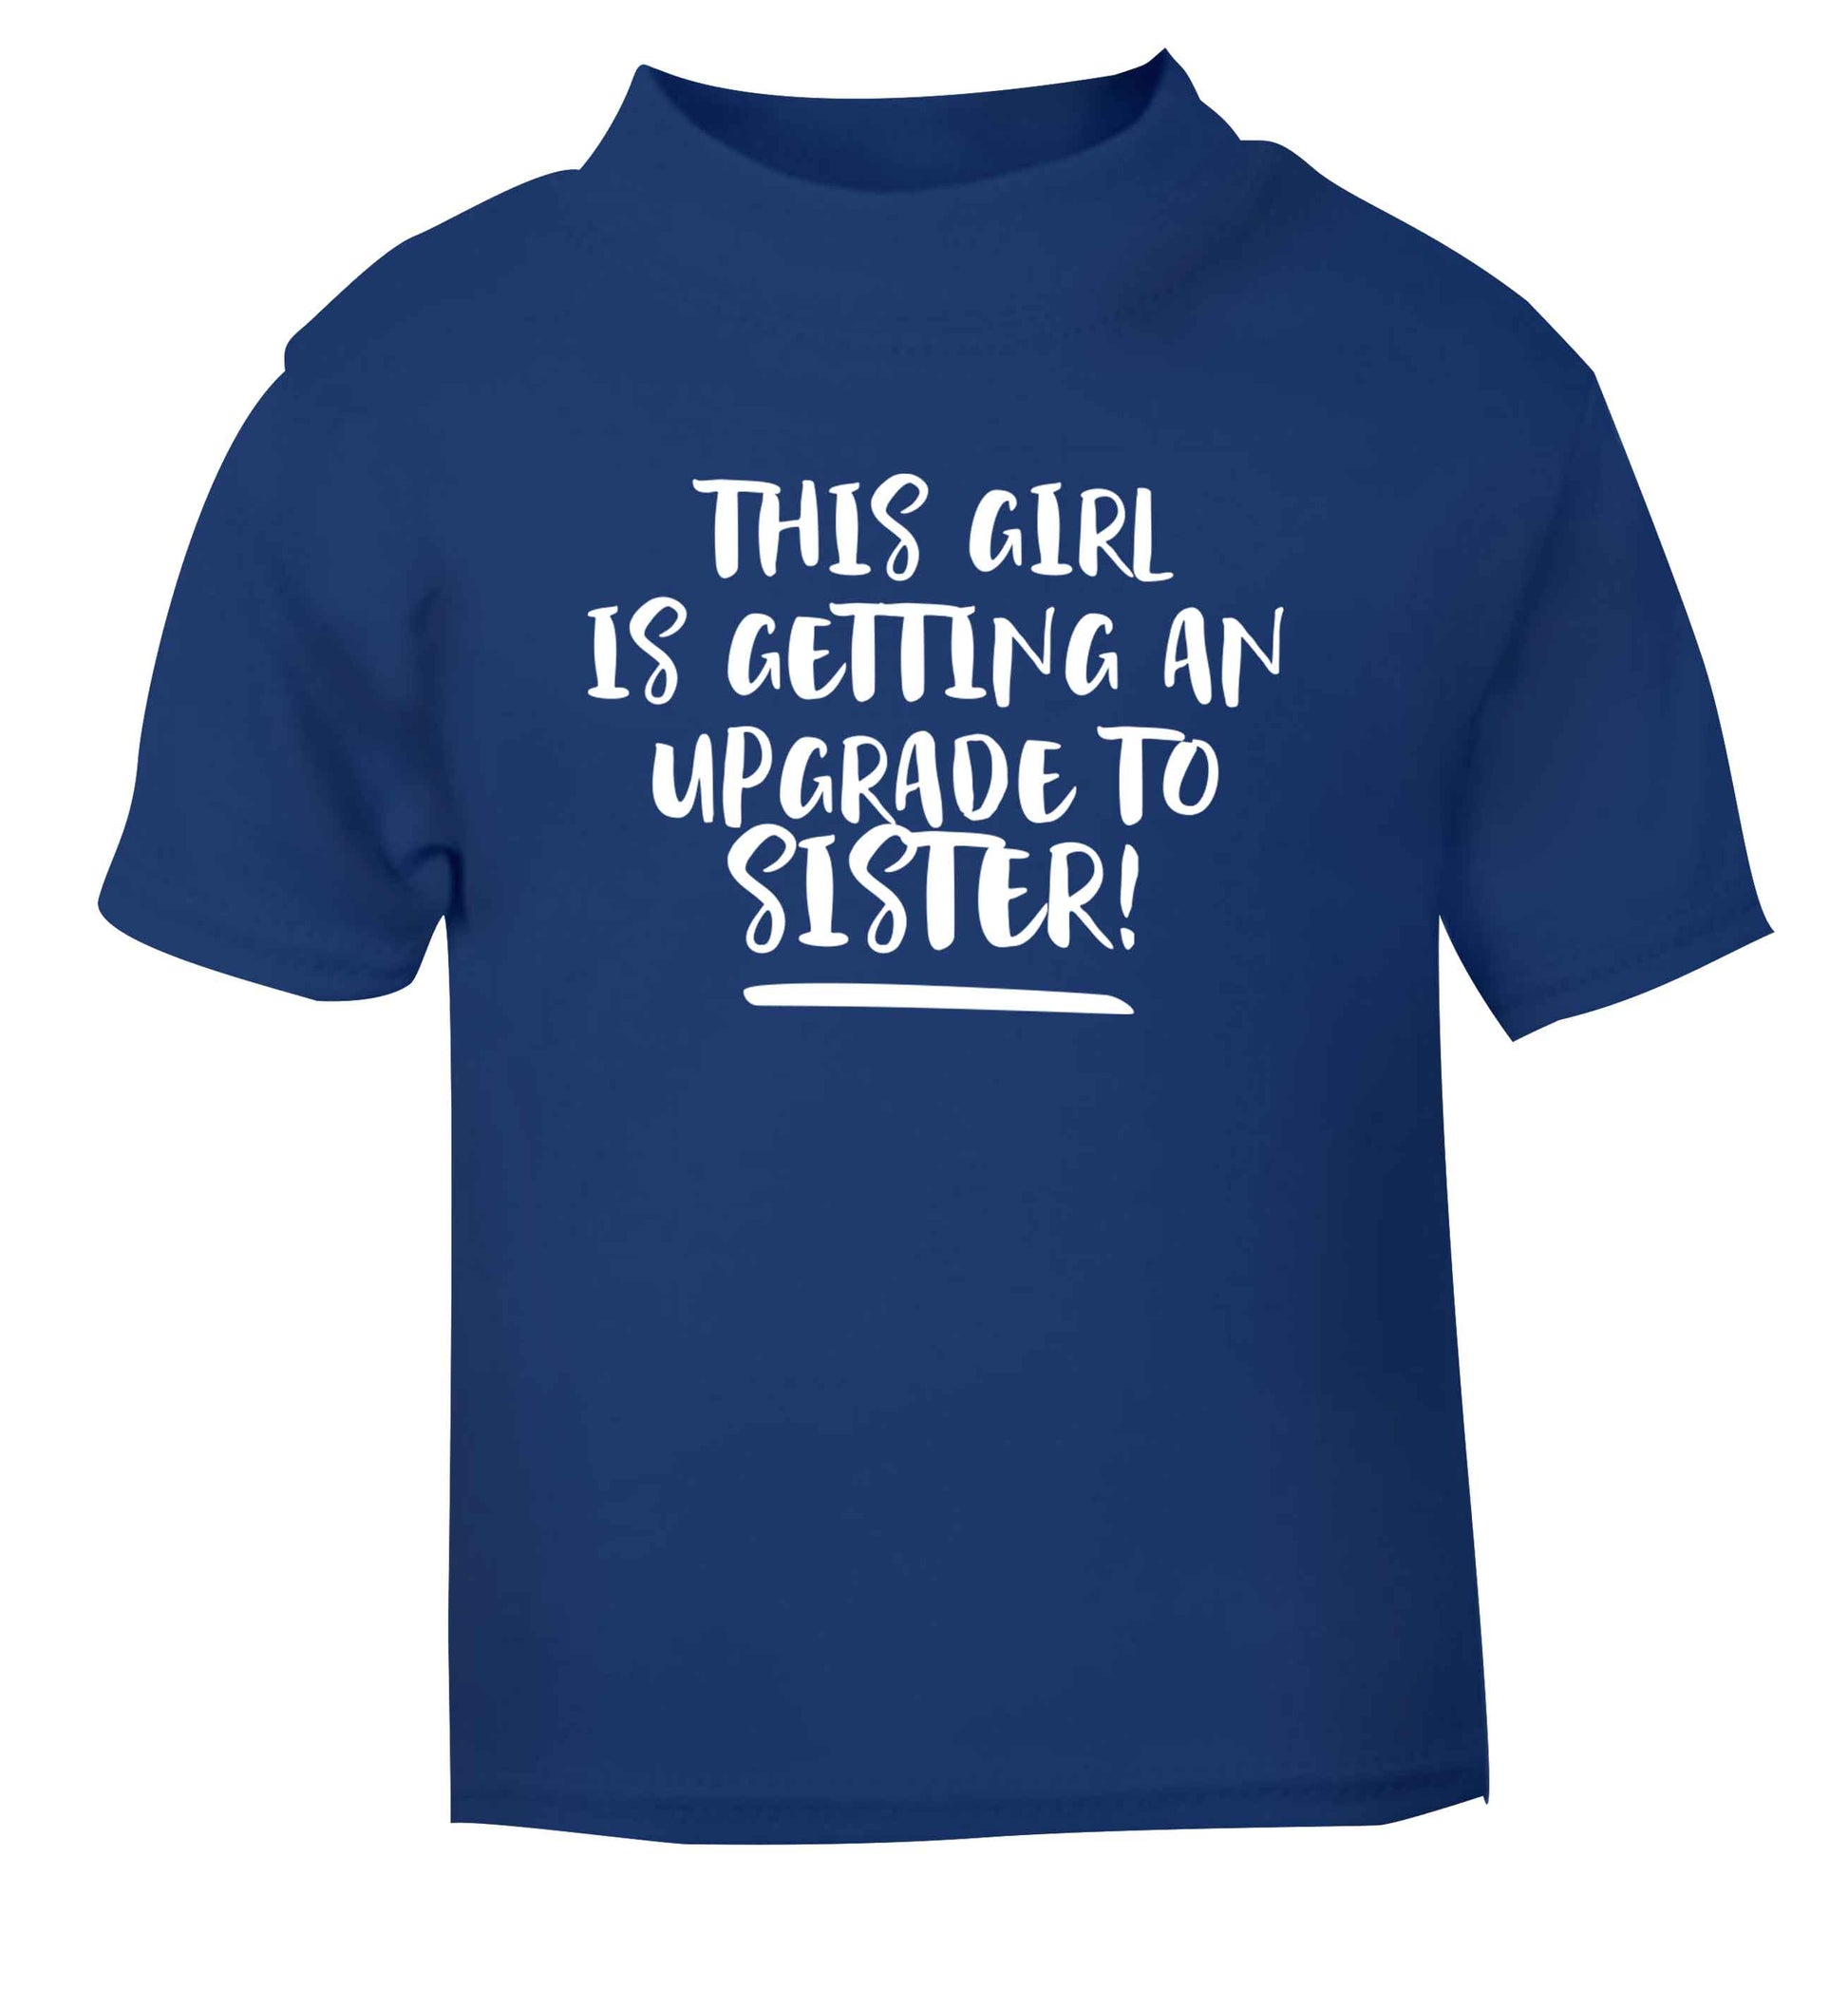 This girl is getting an upgrade to sister! blue Baby Toddler Tshirt 2 Years